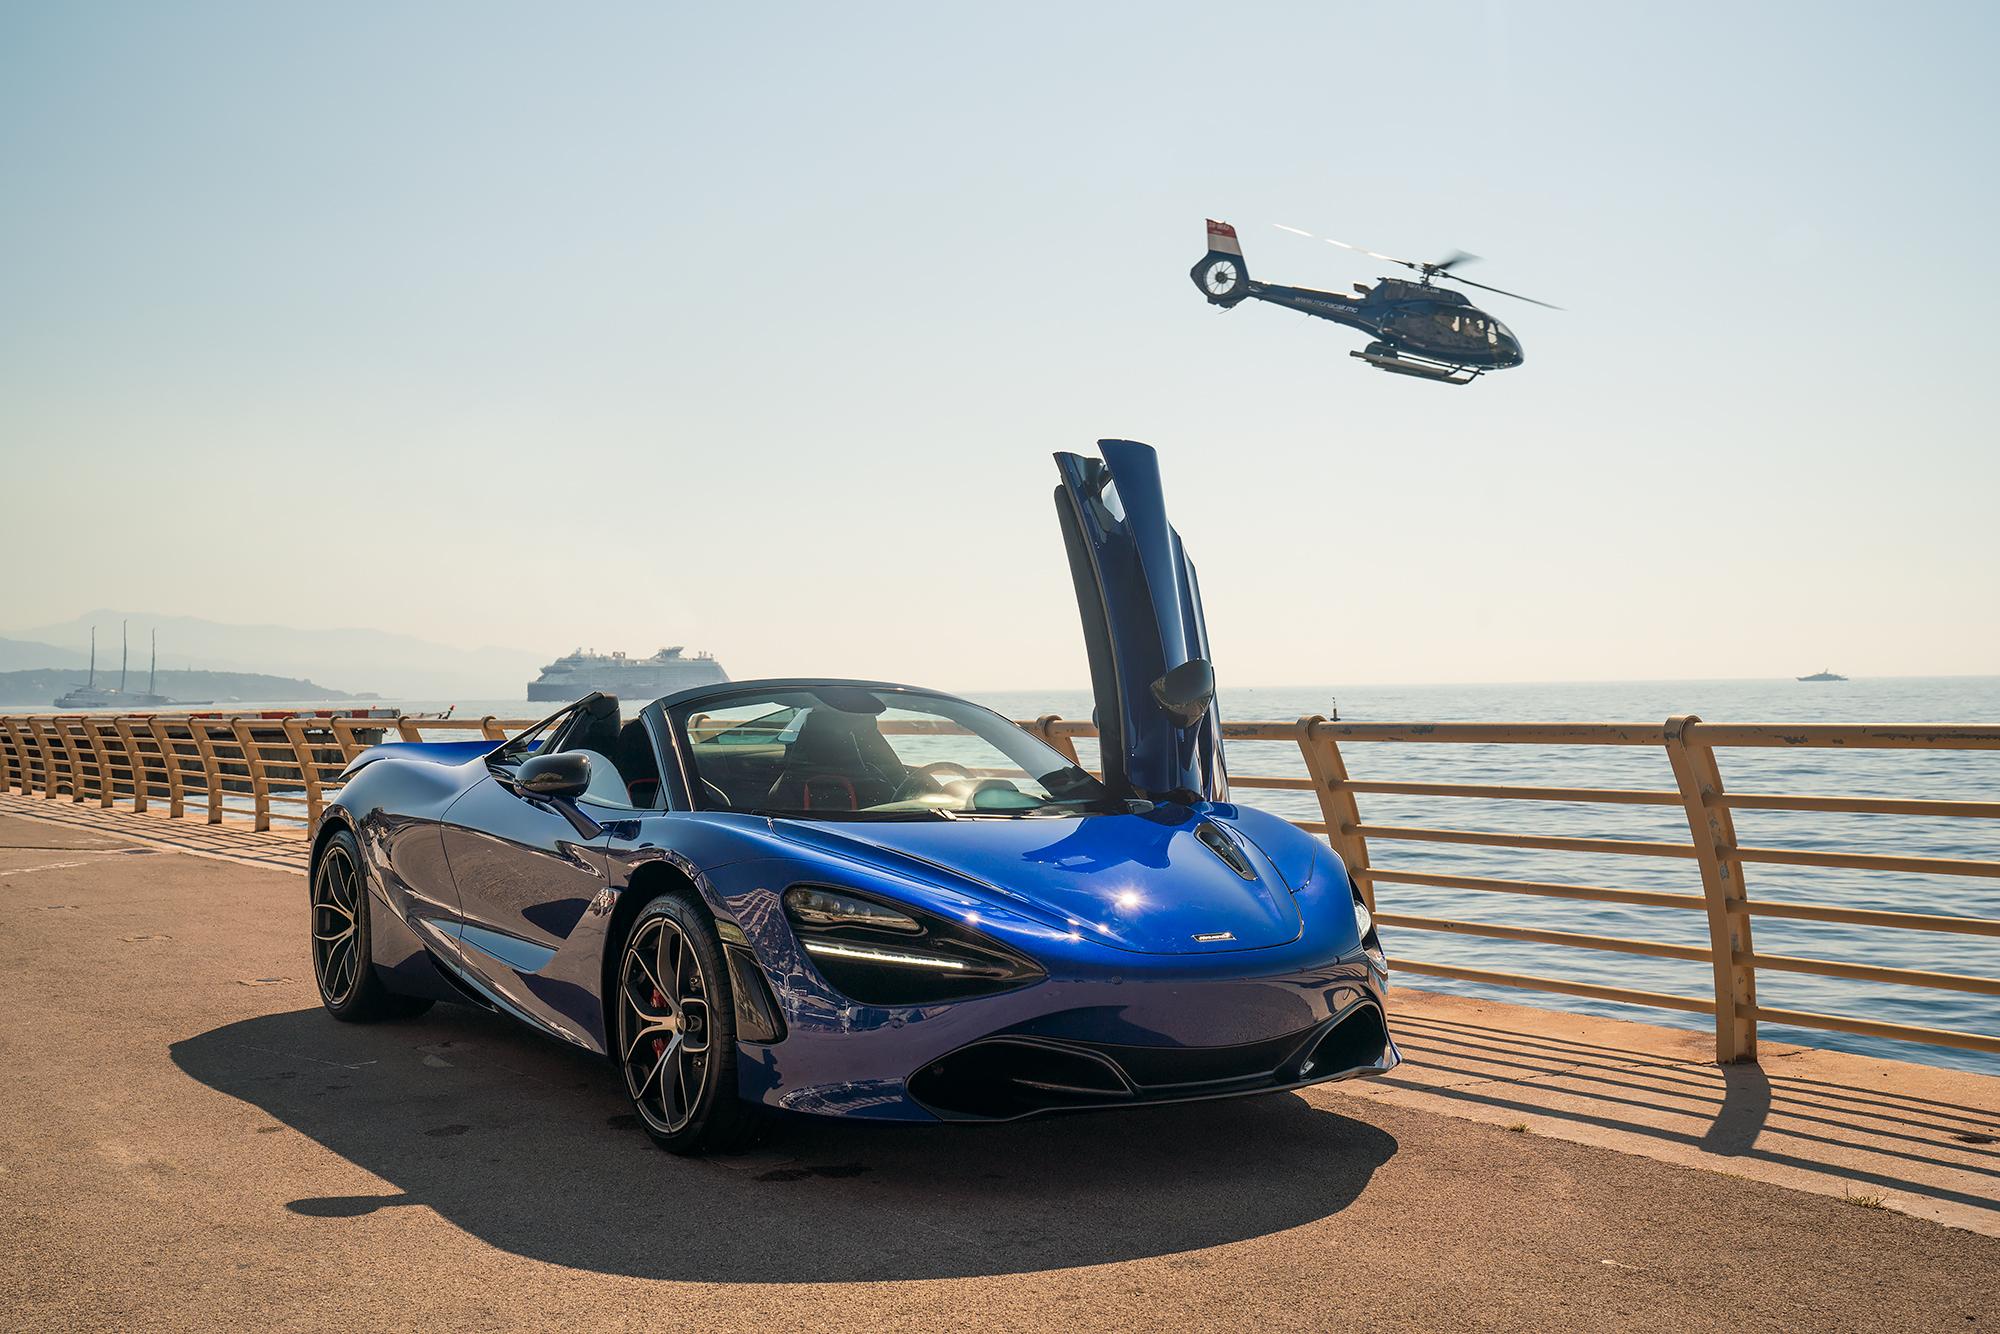 Rent a Luxury Supercar from Monaco Heliport